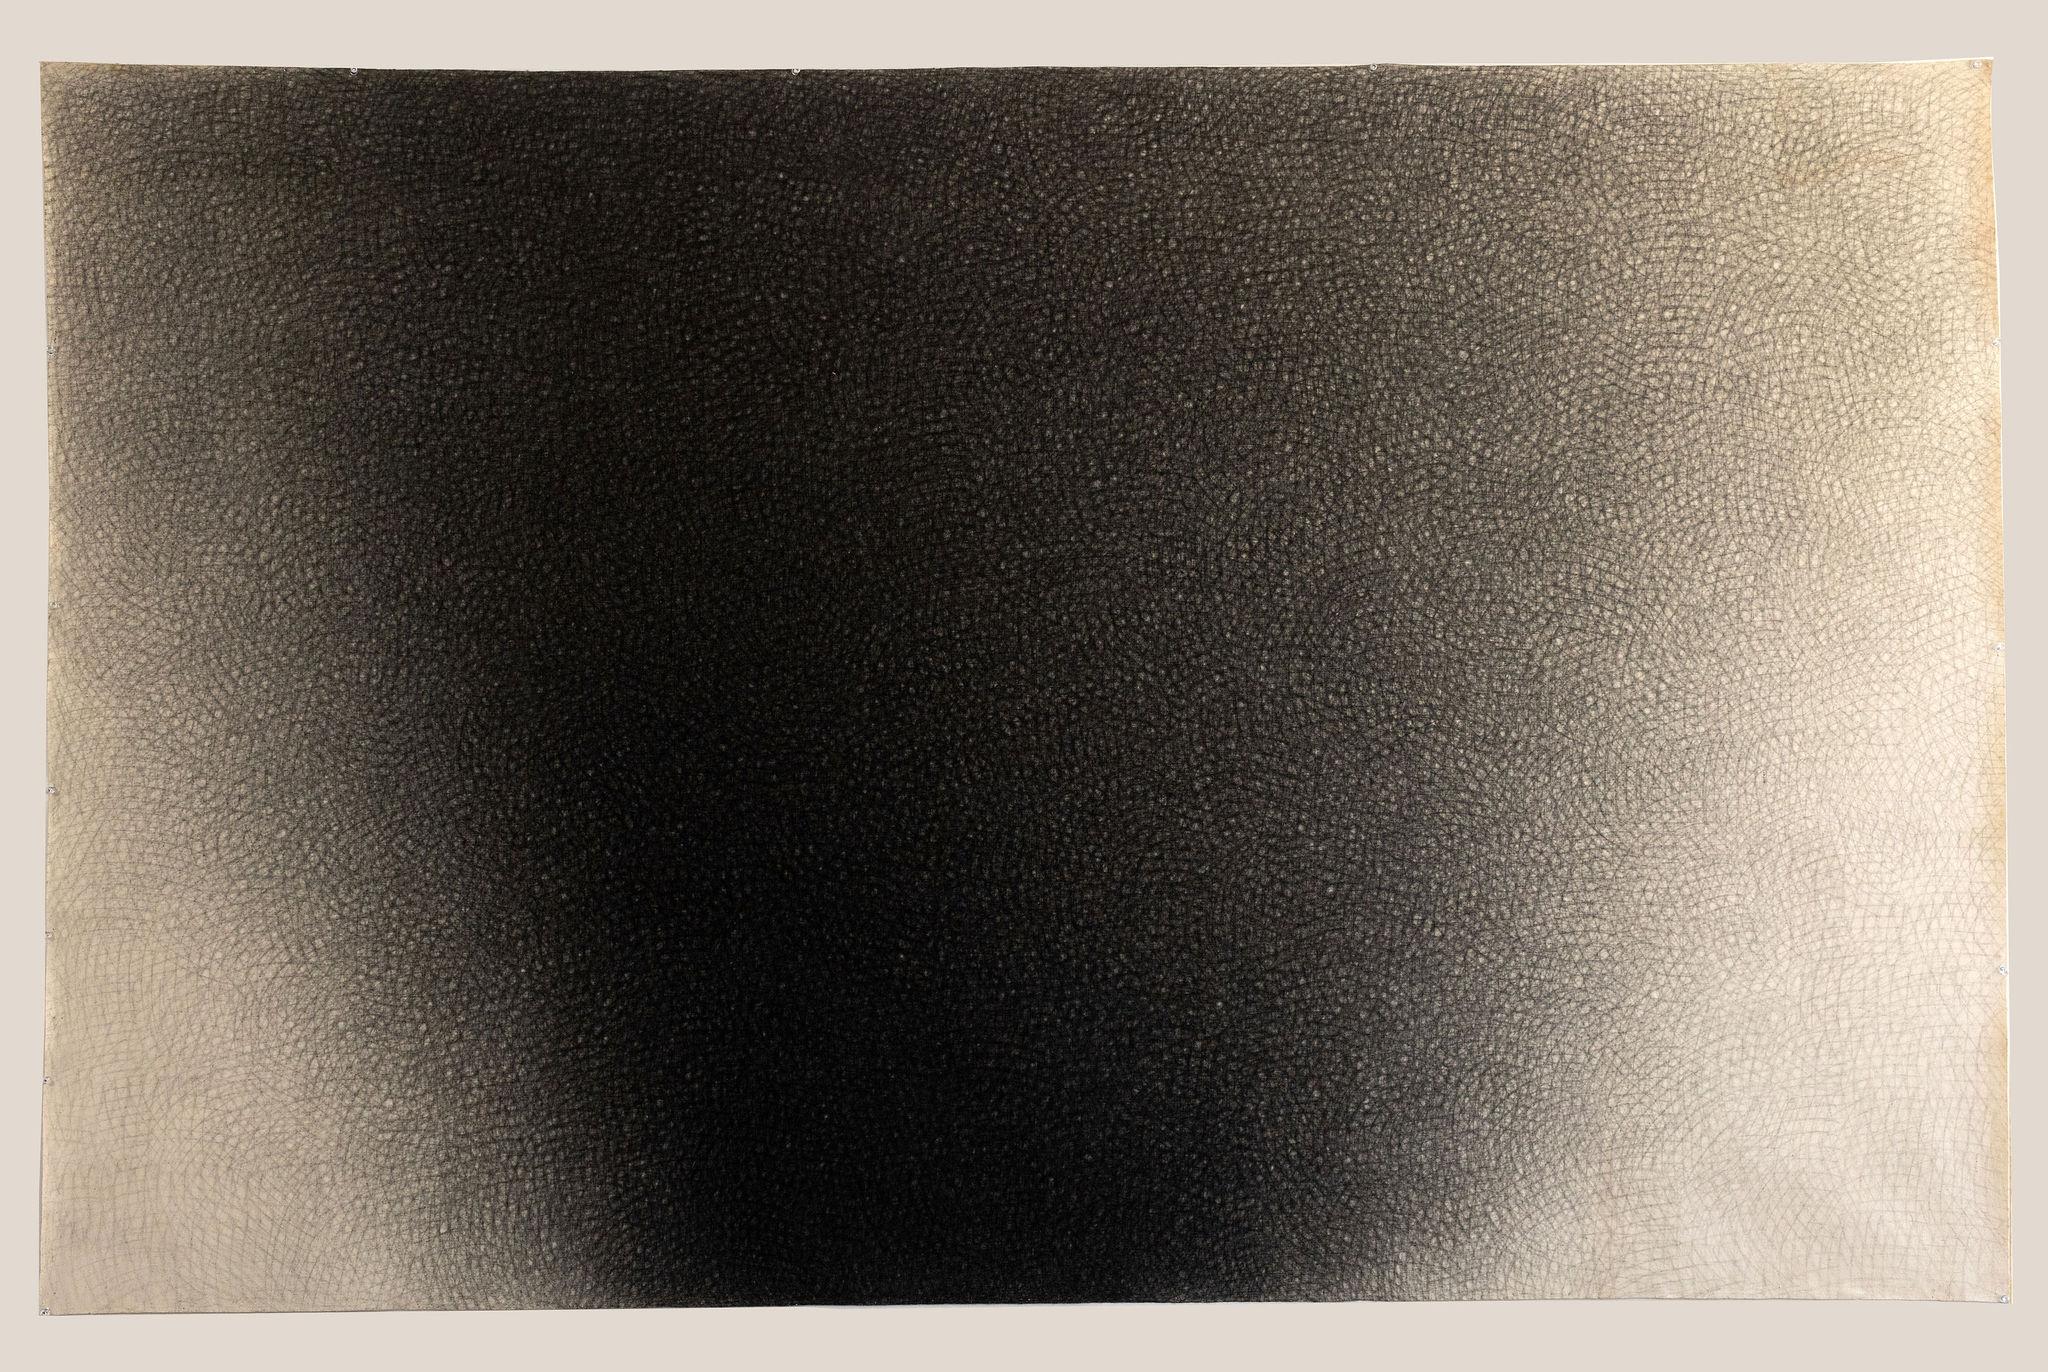 "Airveil" Charcoal Cross-Hatch Drawing on Canvas 1976 Jack Scott